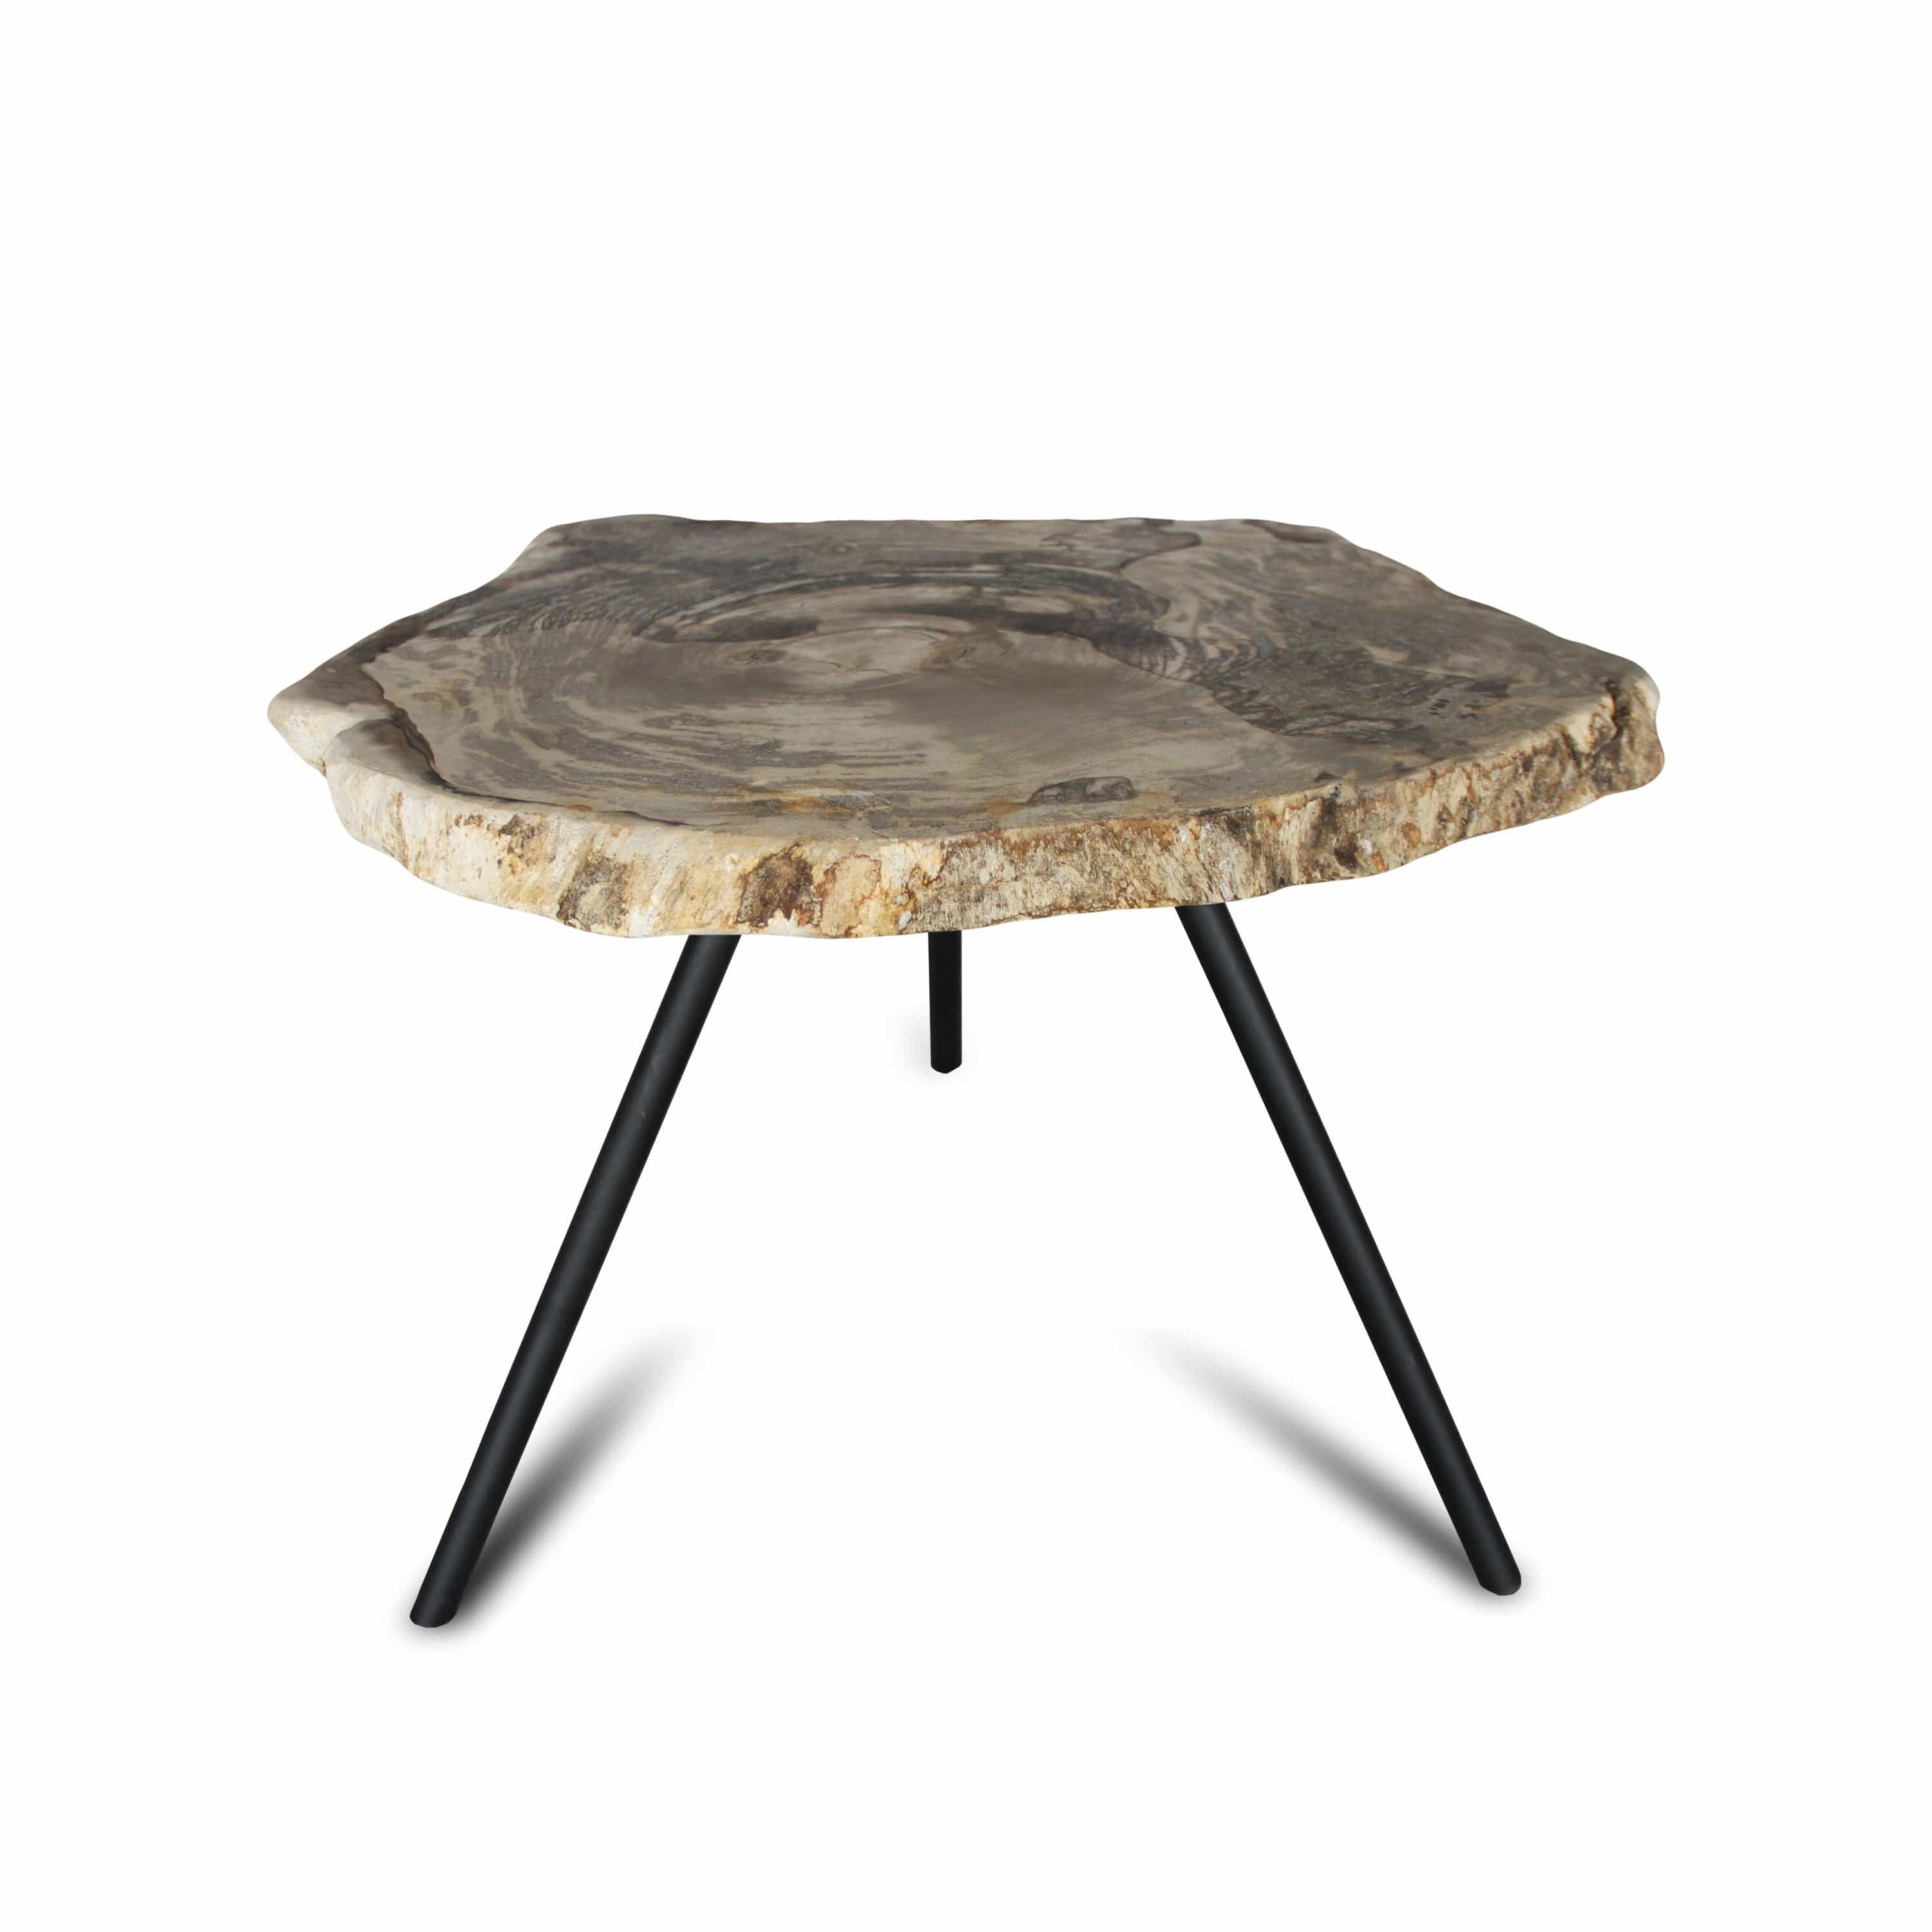 Kalifano Petrified Wood Petrified Wood Round Slice Side Table from Indonesia - 26" / 55 lbs PWT2000.005